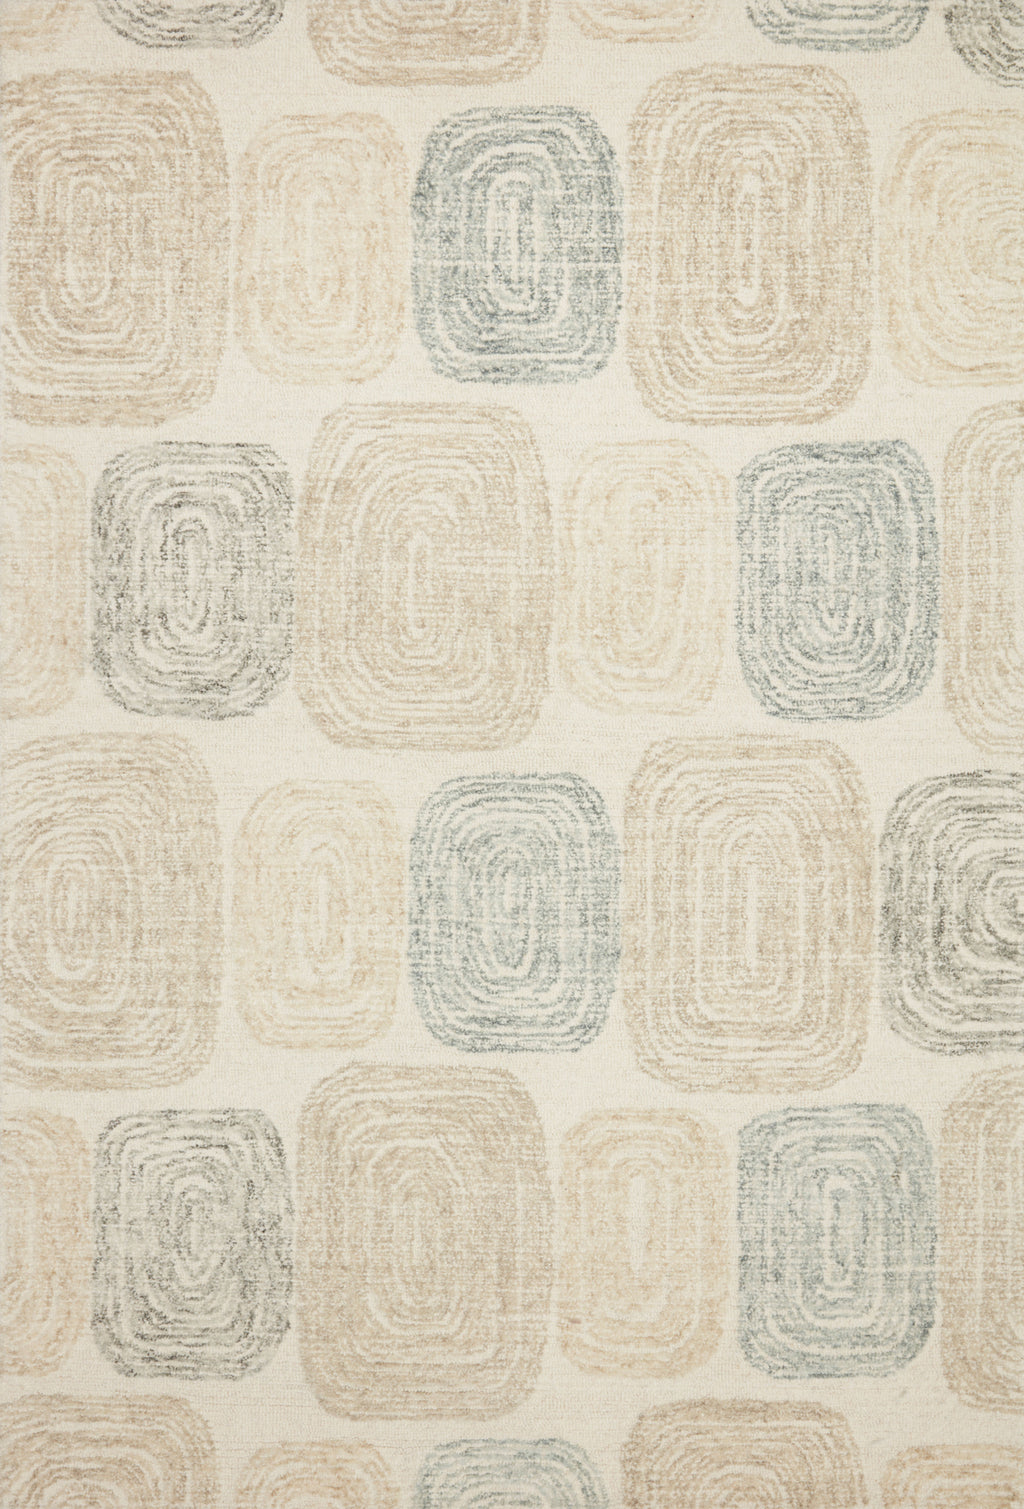 MILO Collection Wool Rug  in  Teal / Neutral Blue Accent Hand-Tufted Wool